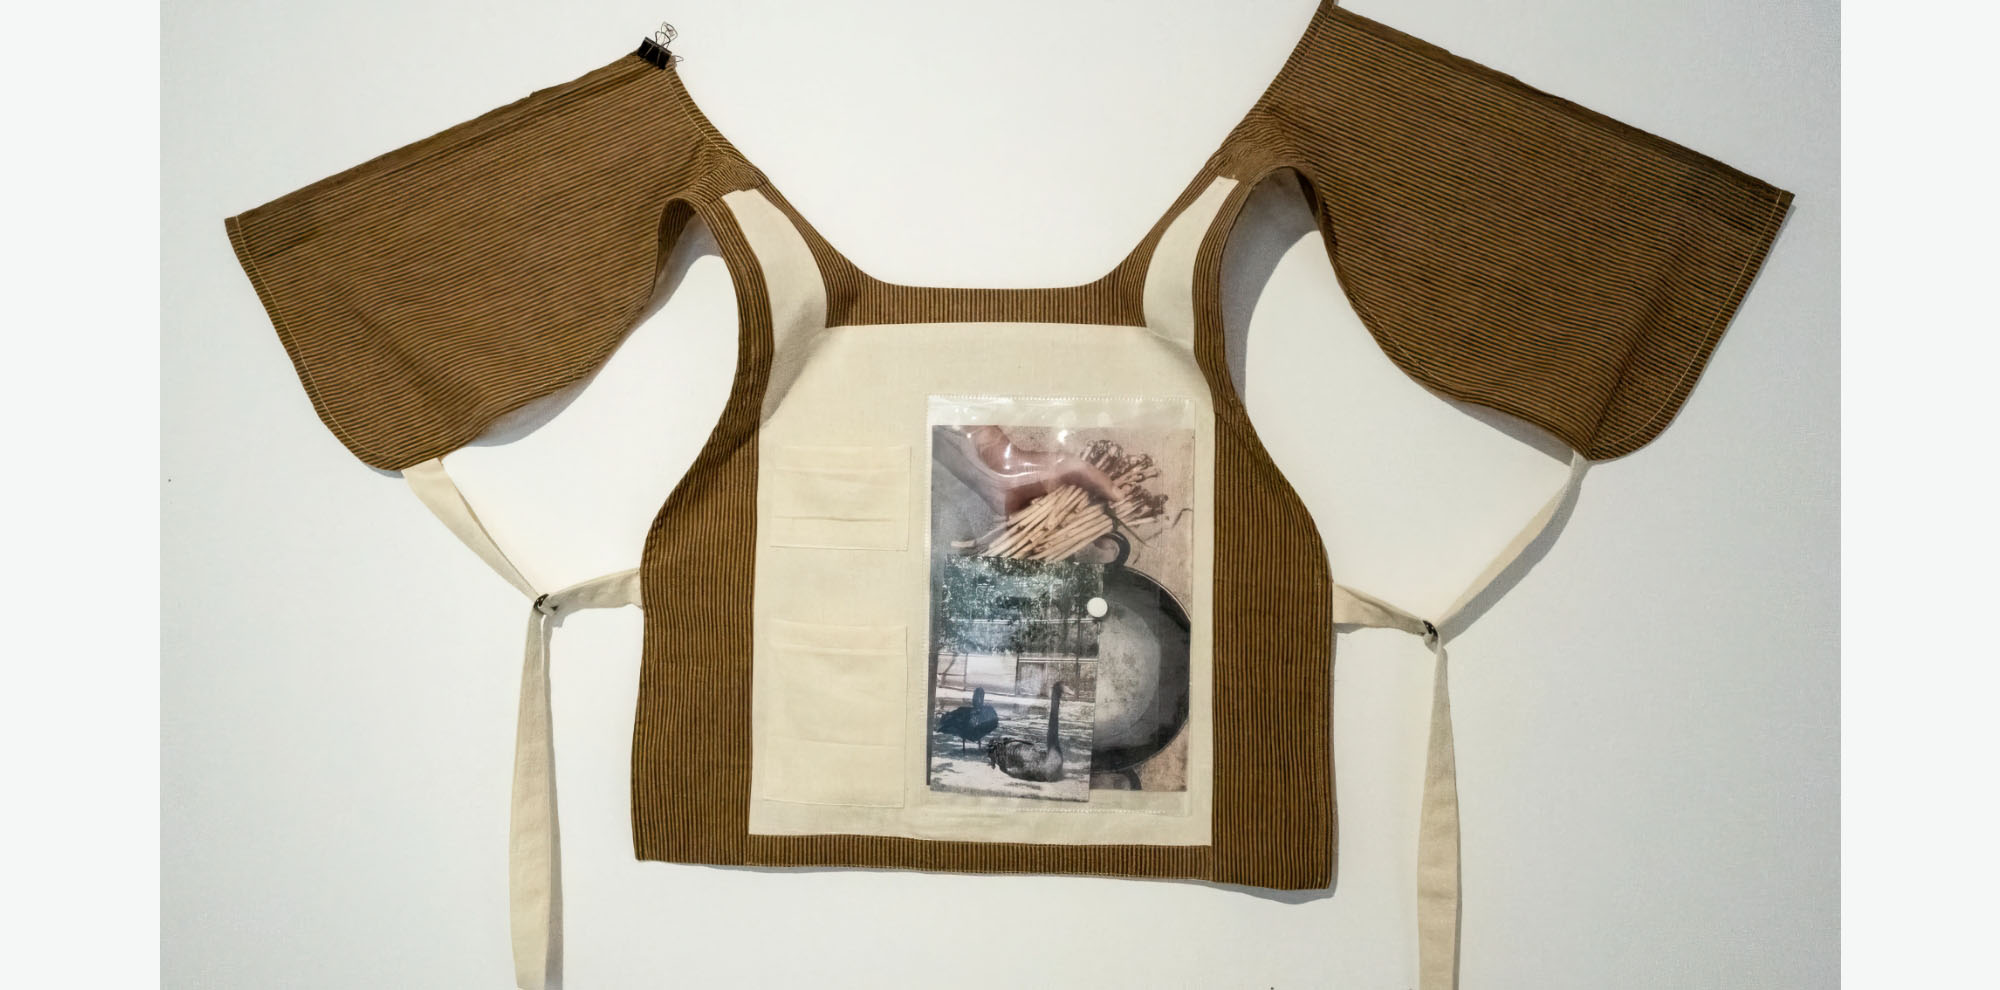 A vest with a transparent pocket hangs against a white wall. The pocket contains a photograph which depicts a hand holding sticks over a vessel, as well as a small photograph of two birds.